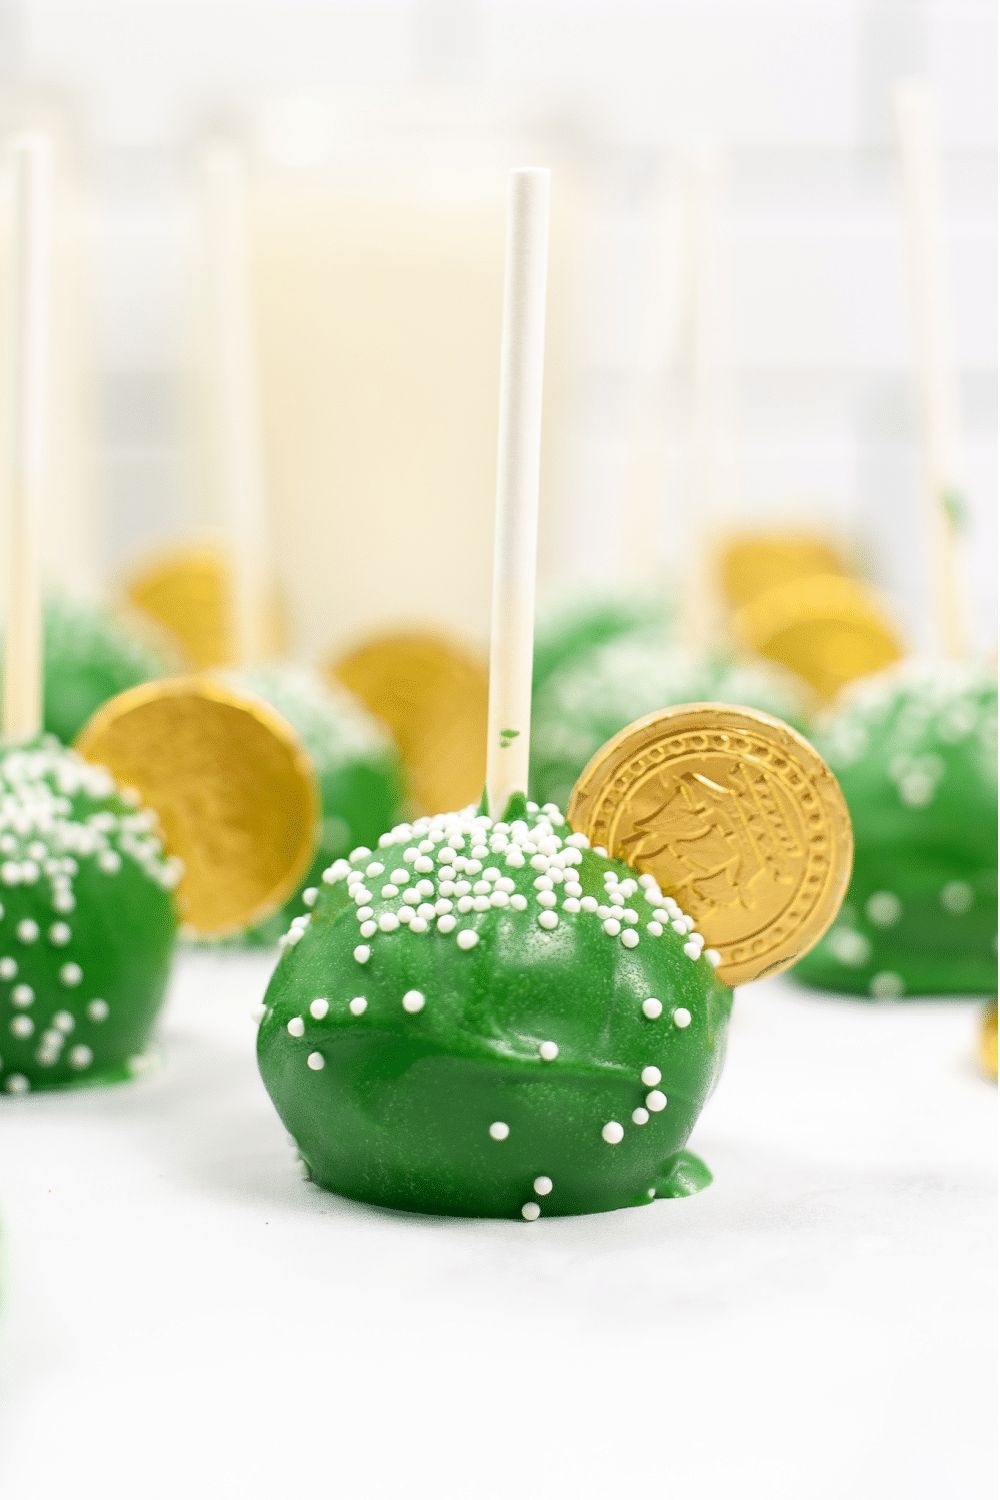 Green cake pops with gold coins